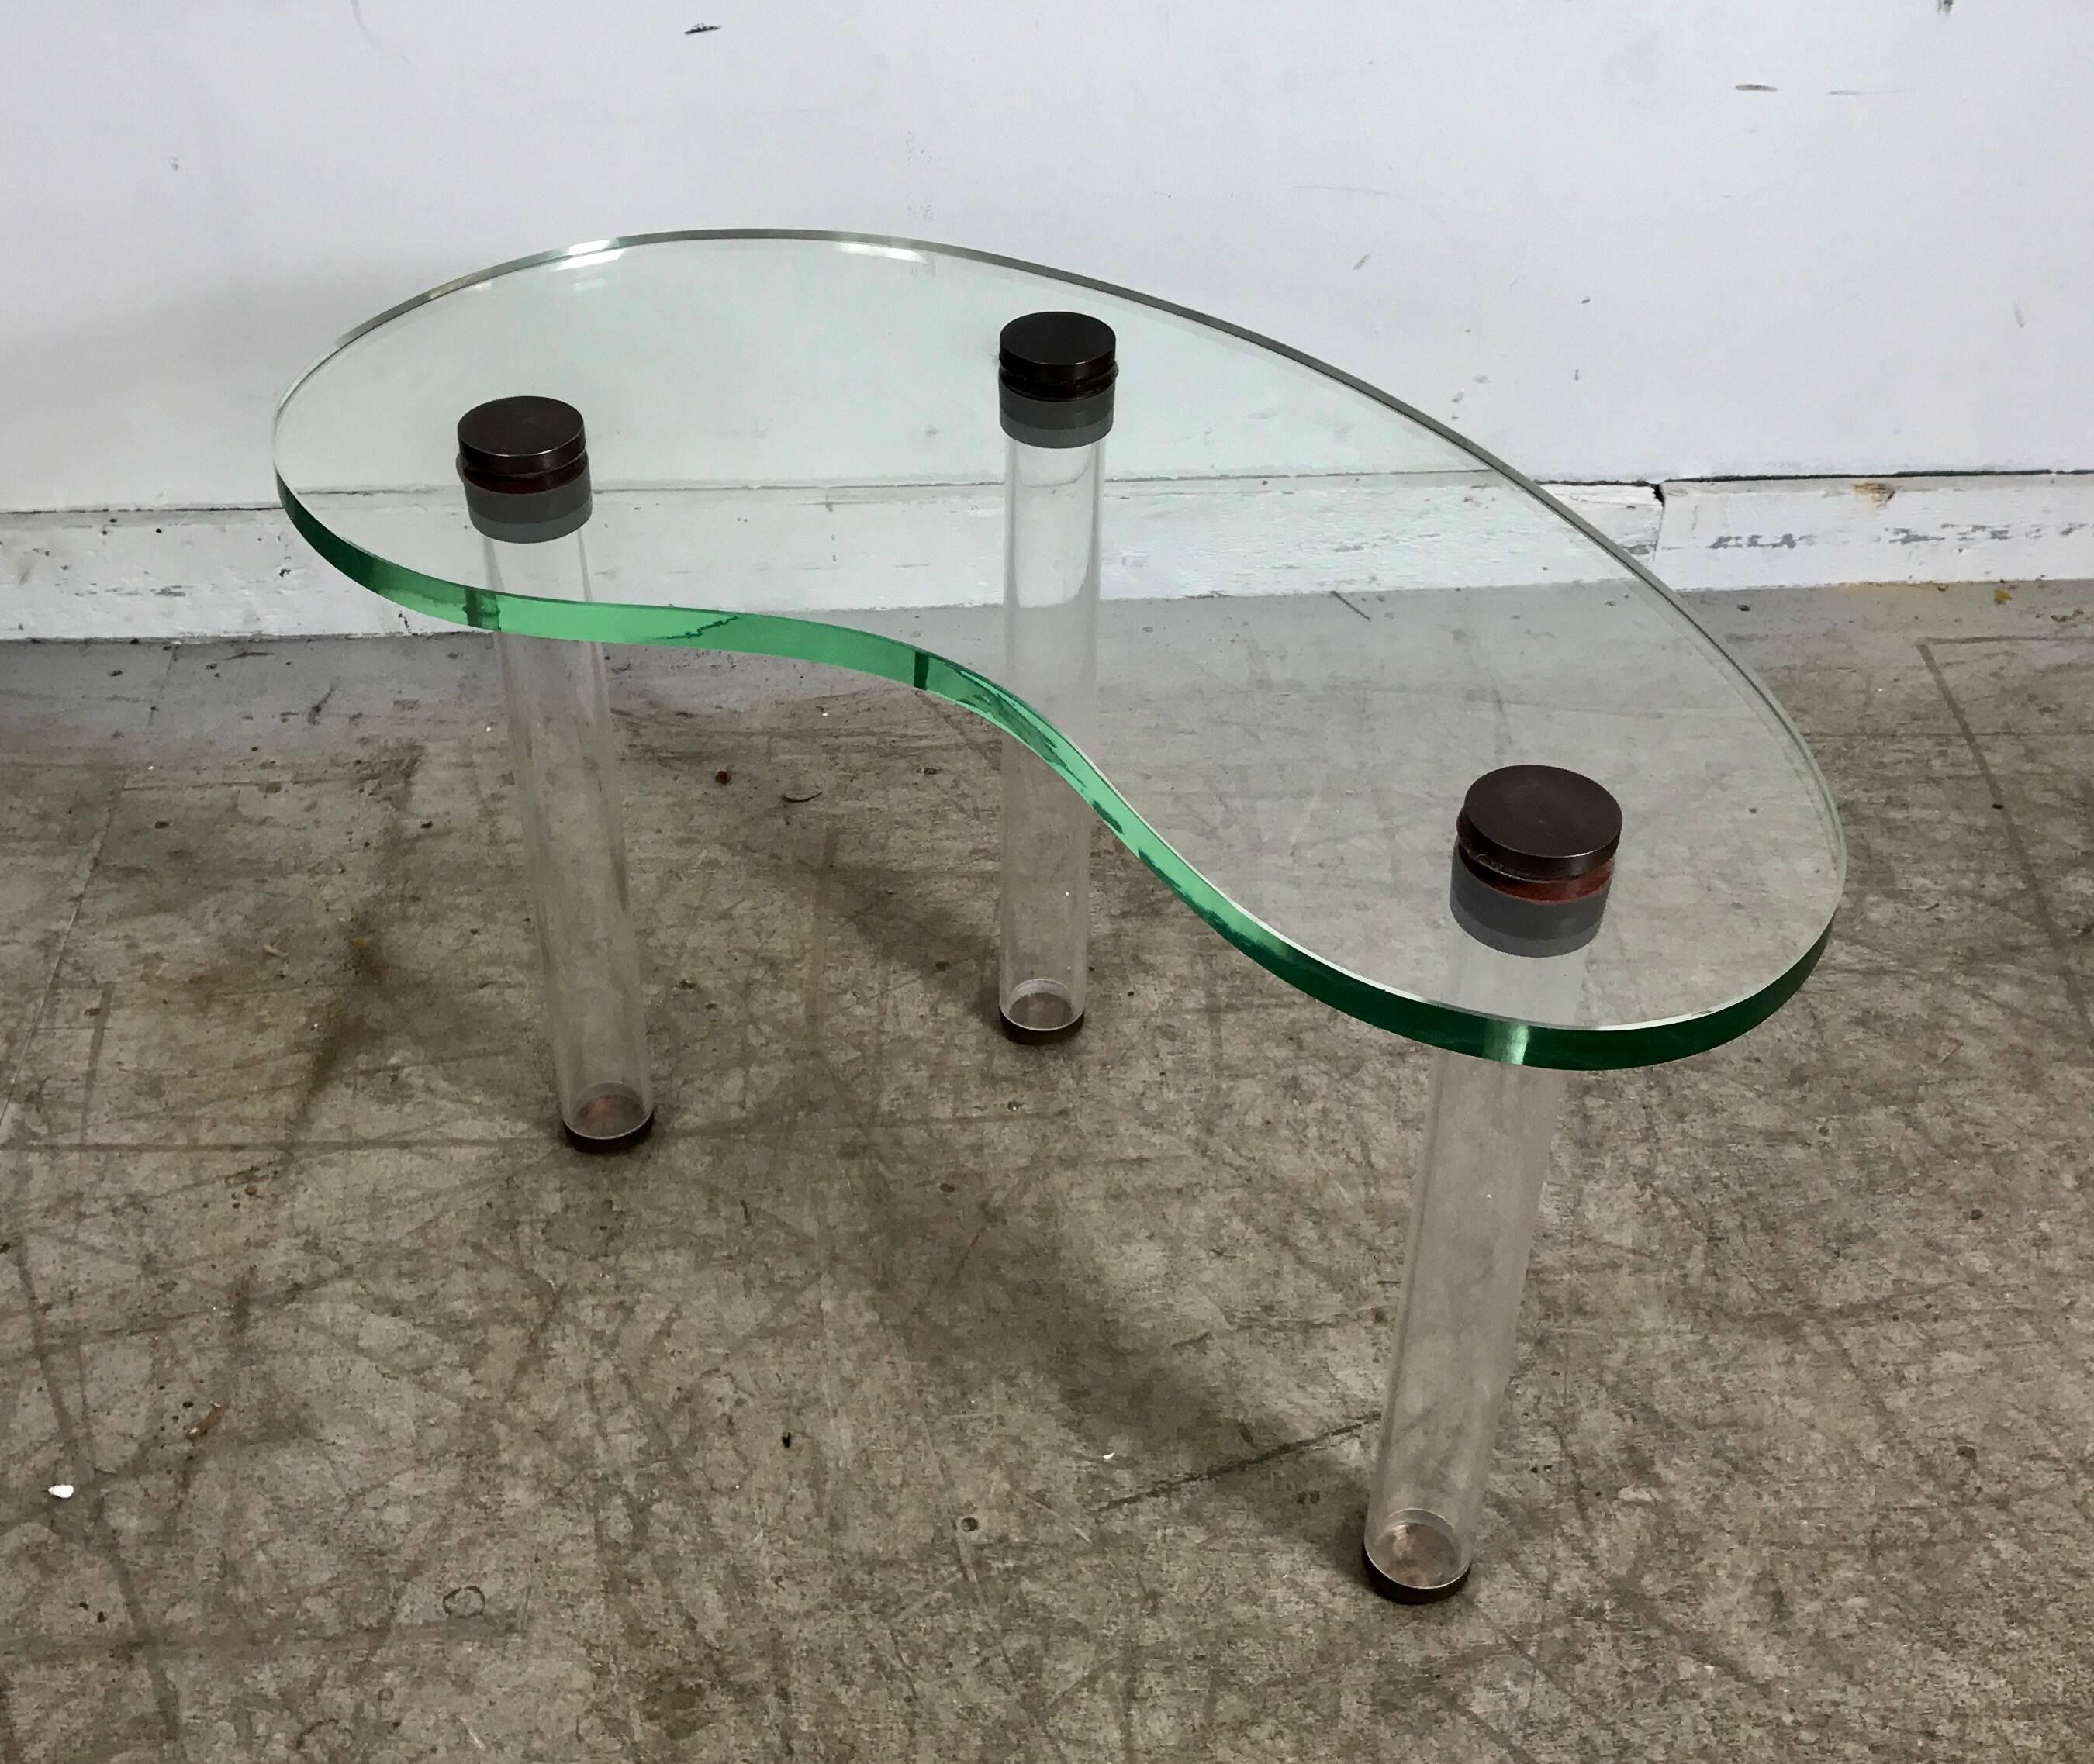 Super rare cocktail table designed by Gilbert Rohde, manufactured by Herman Miller in 1939. One inch thick kidney shape polished plate glass, Lucite cylinder legs. Brass caps and feet, incredible design, beautiful original condition. Examples found